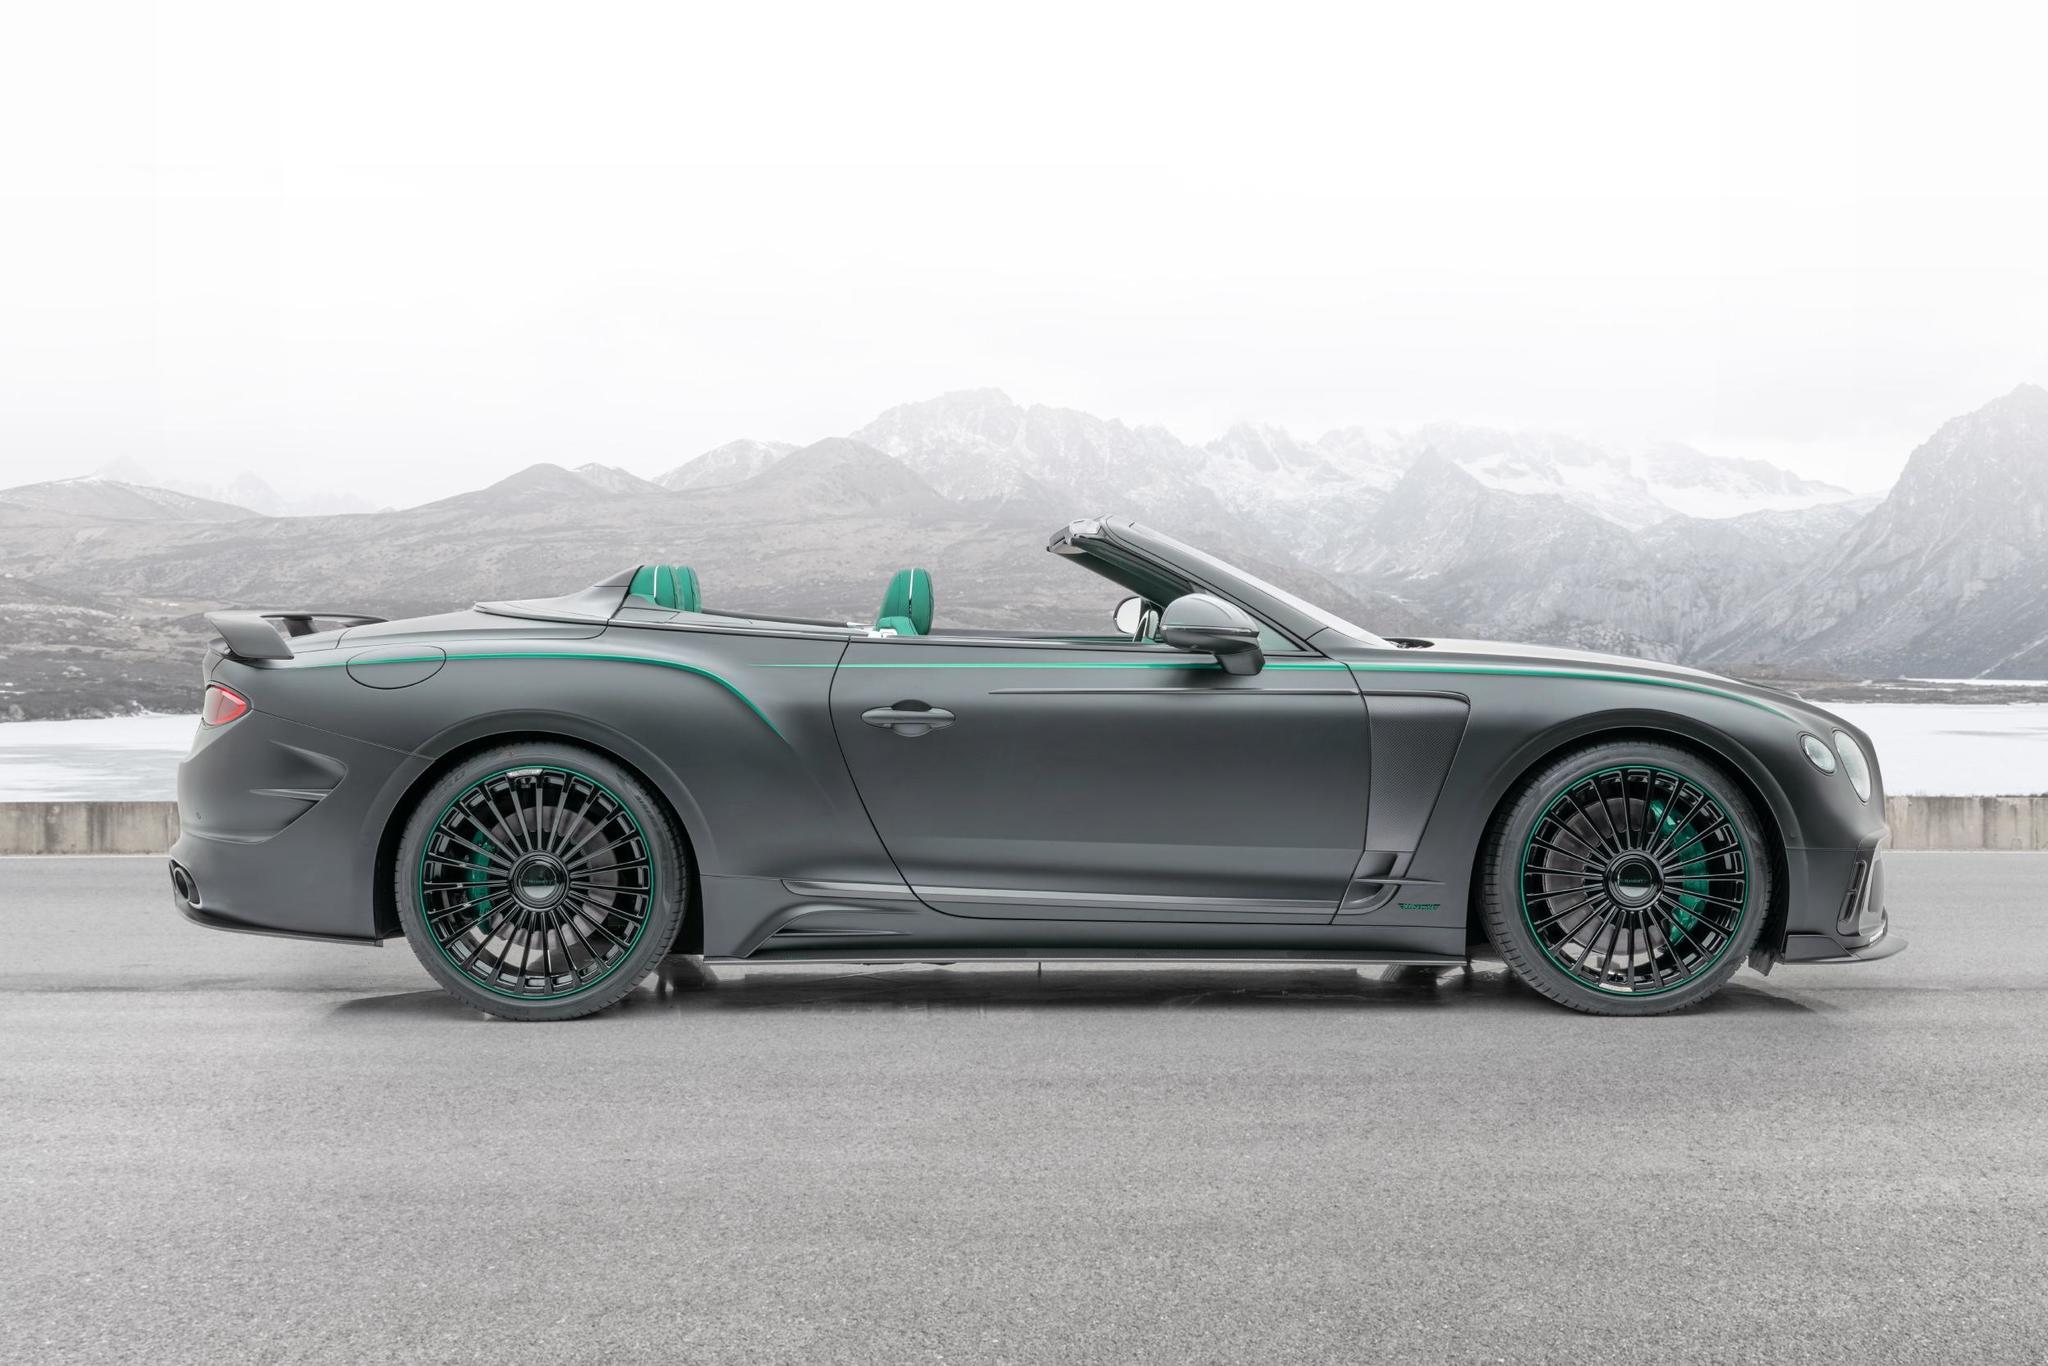 Mansory body kit for Bentley Continental GT carbon